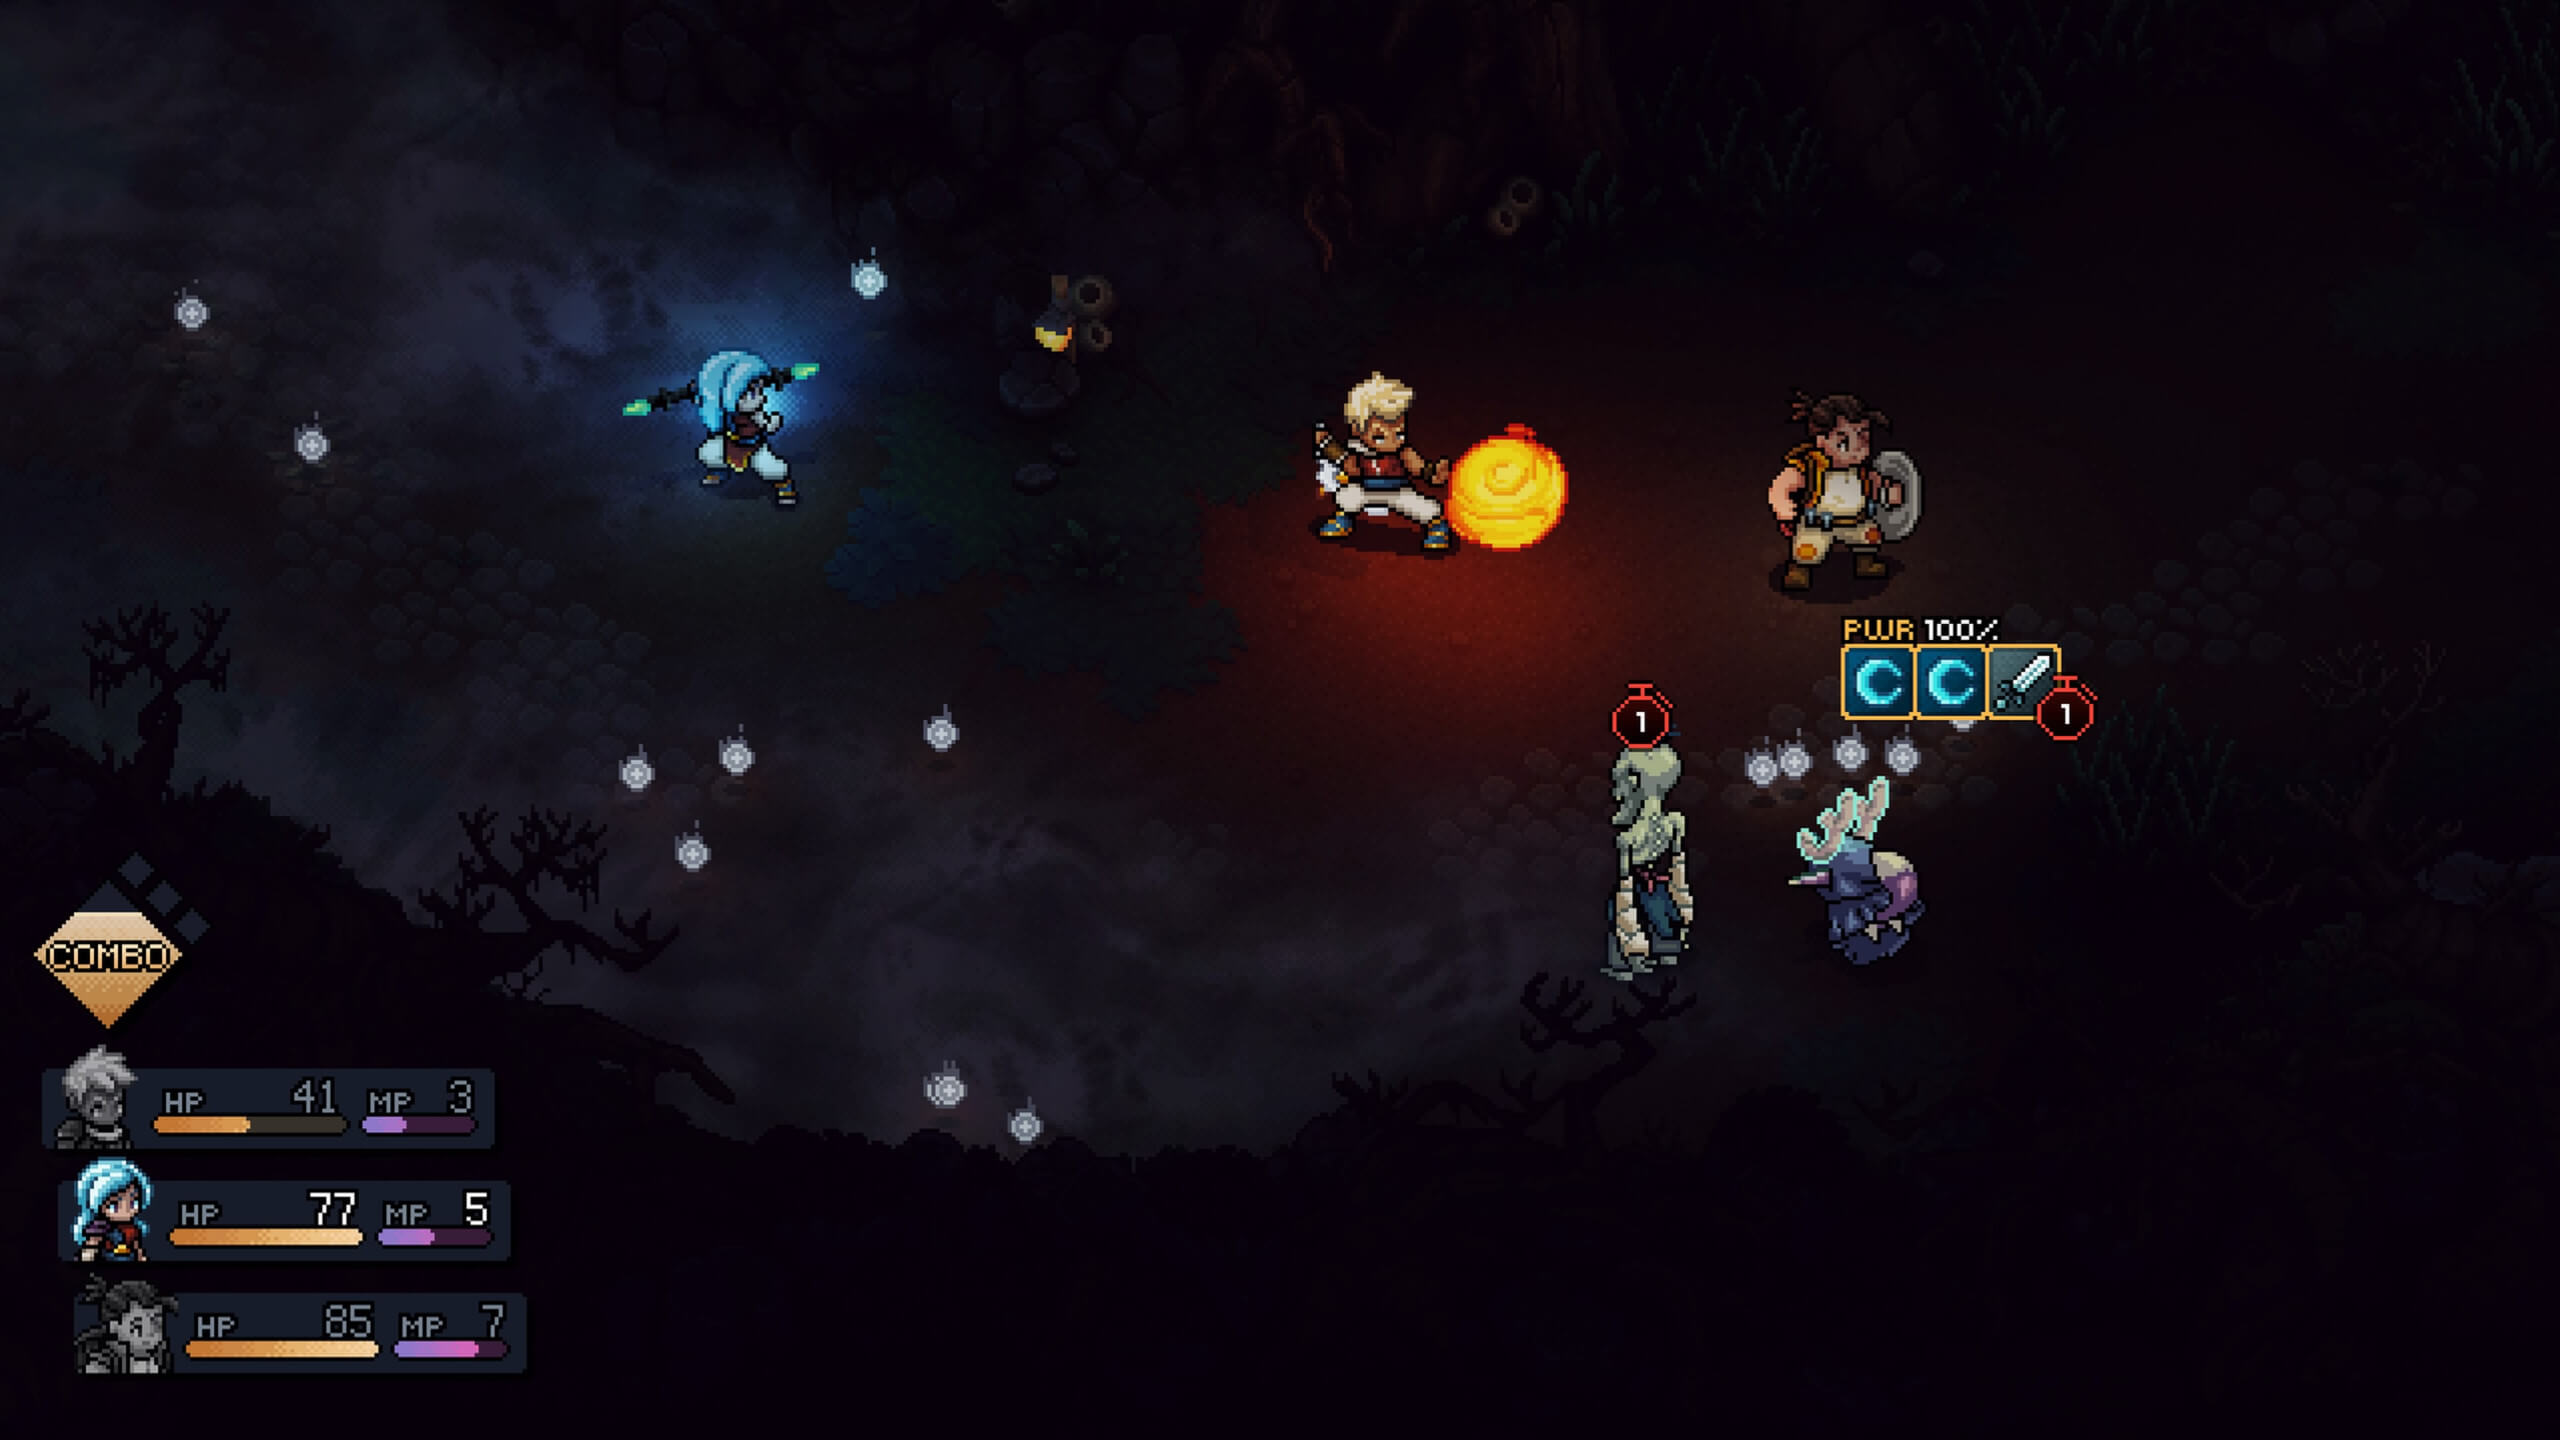 The screen is dark and one of my characters has charged up a small sun to throw at the enemies. One of the enemies have activated there special move. Several Live Mana can be seen floating around.